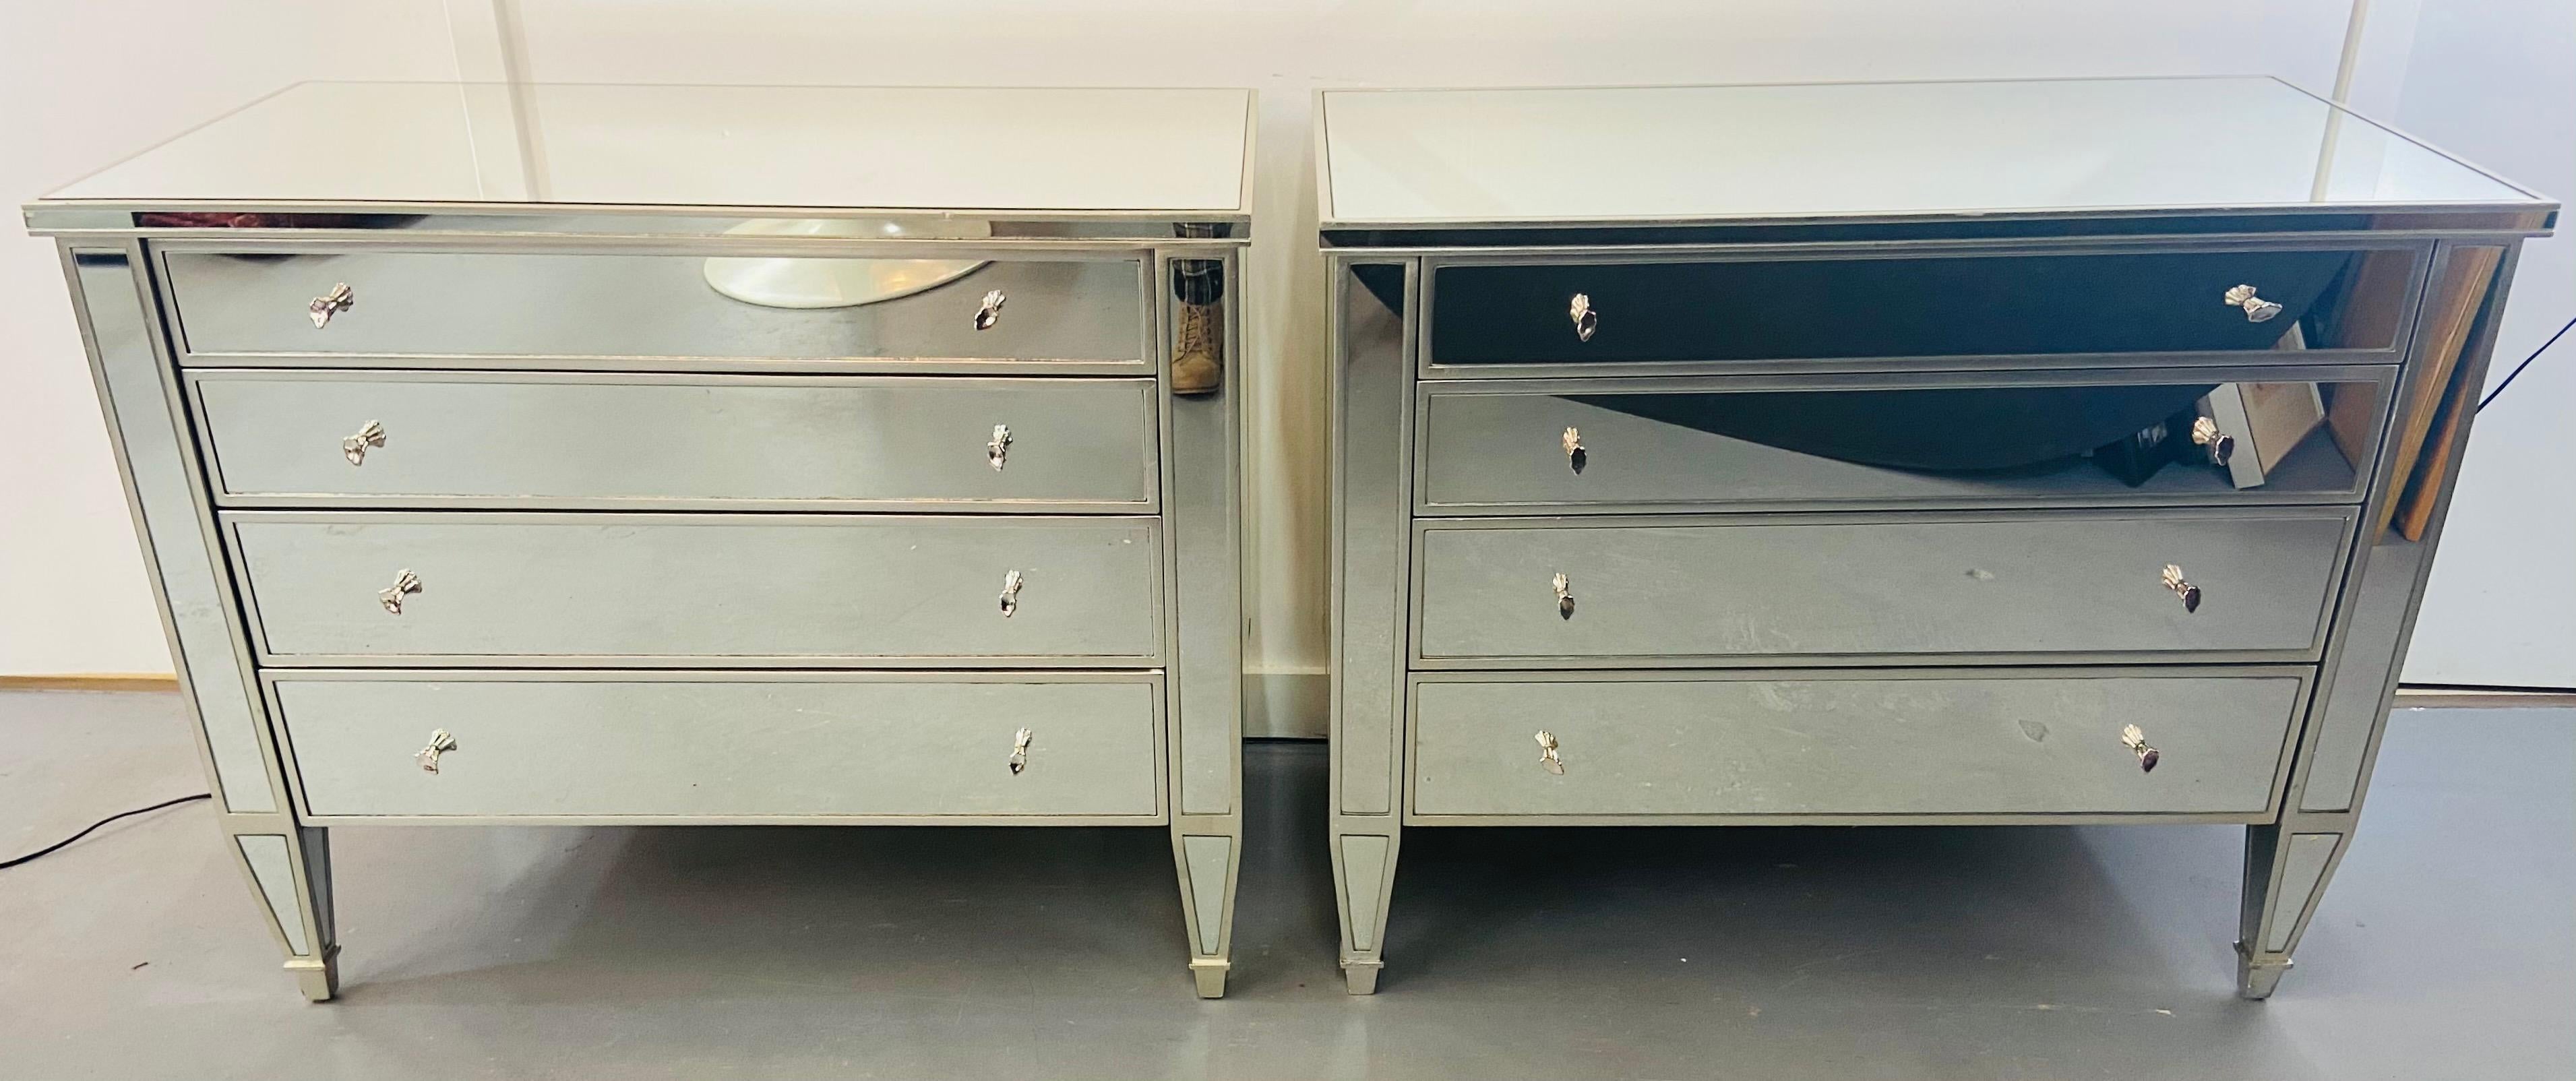 A stunning pair of Art Deco style Nancy Corzine Collette mirrored commodes, nightstands or chests. Each commode has 4 drawers with original silvered knobs and is signed inside the drawer Nancy Corzine. Classy and stylish, these pair of commodes or